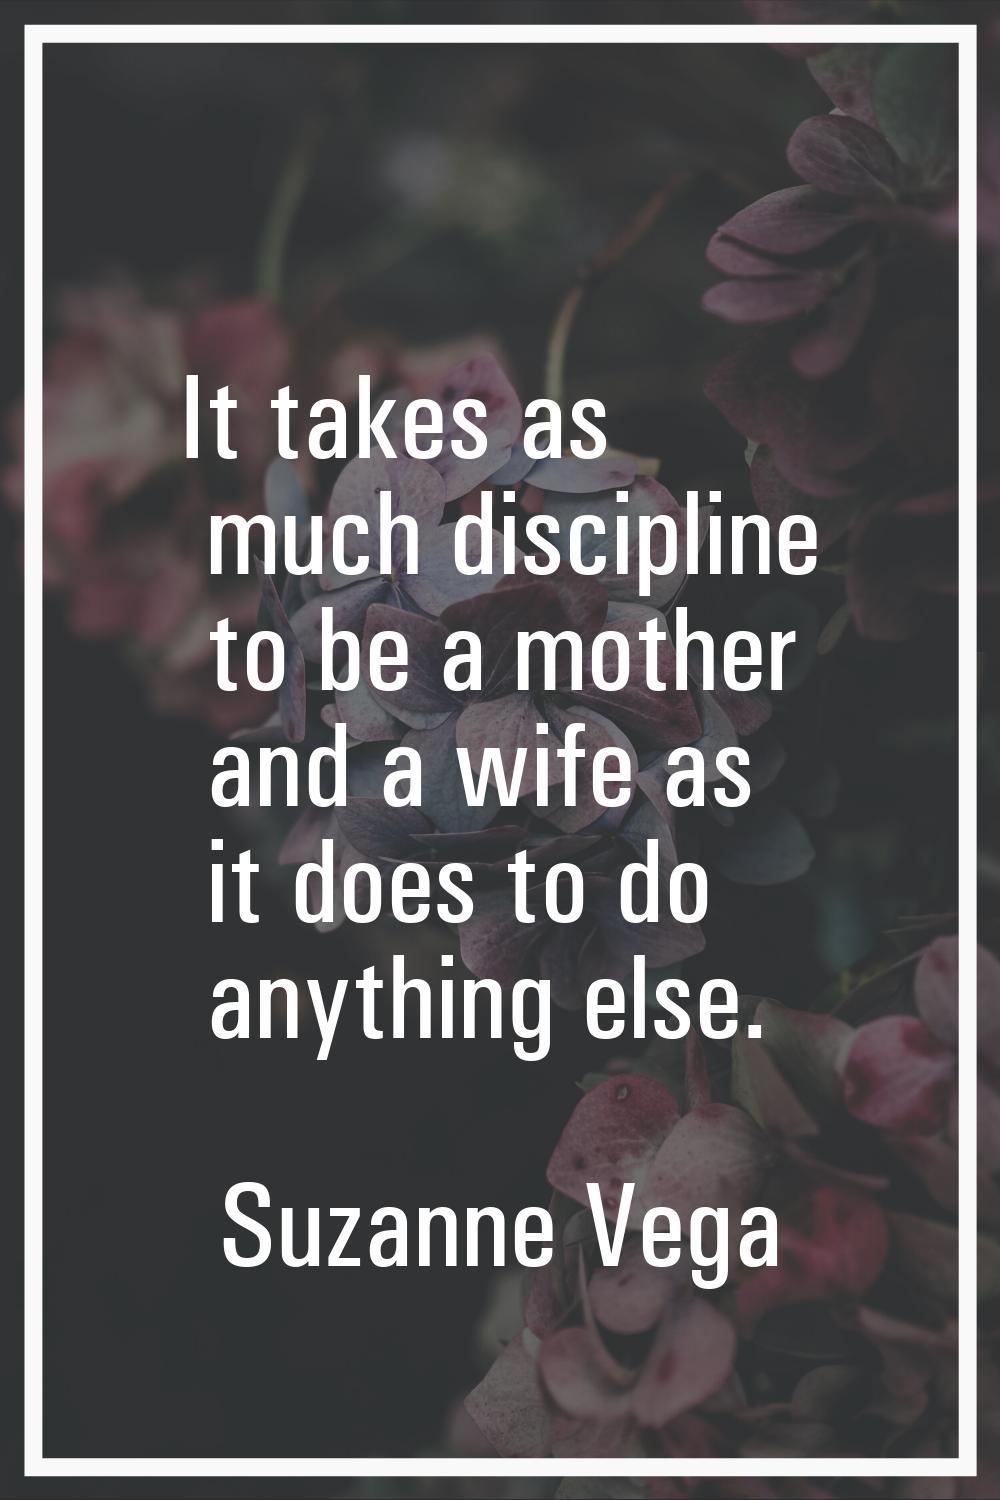 It takes as much discipline to be a mother and a wife as it does to do anything else.